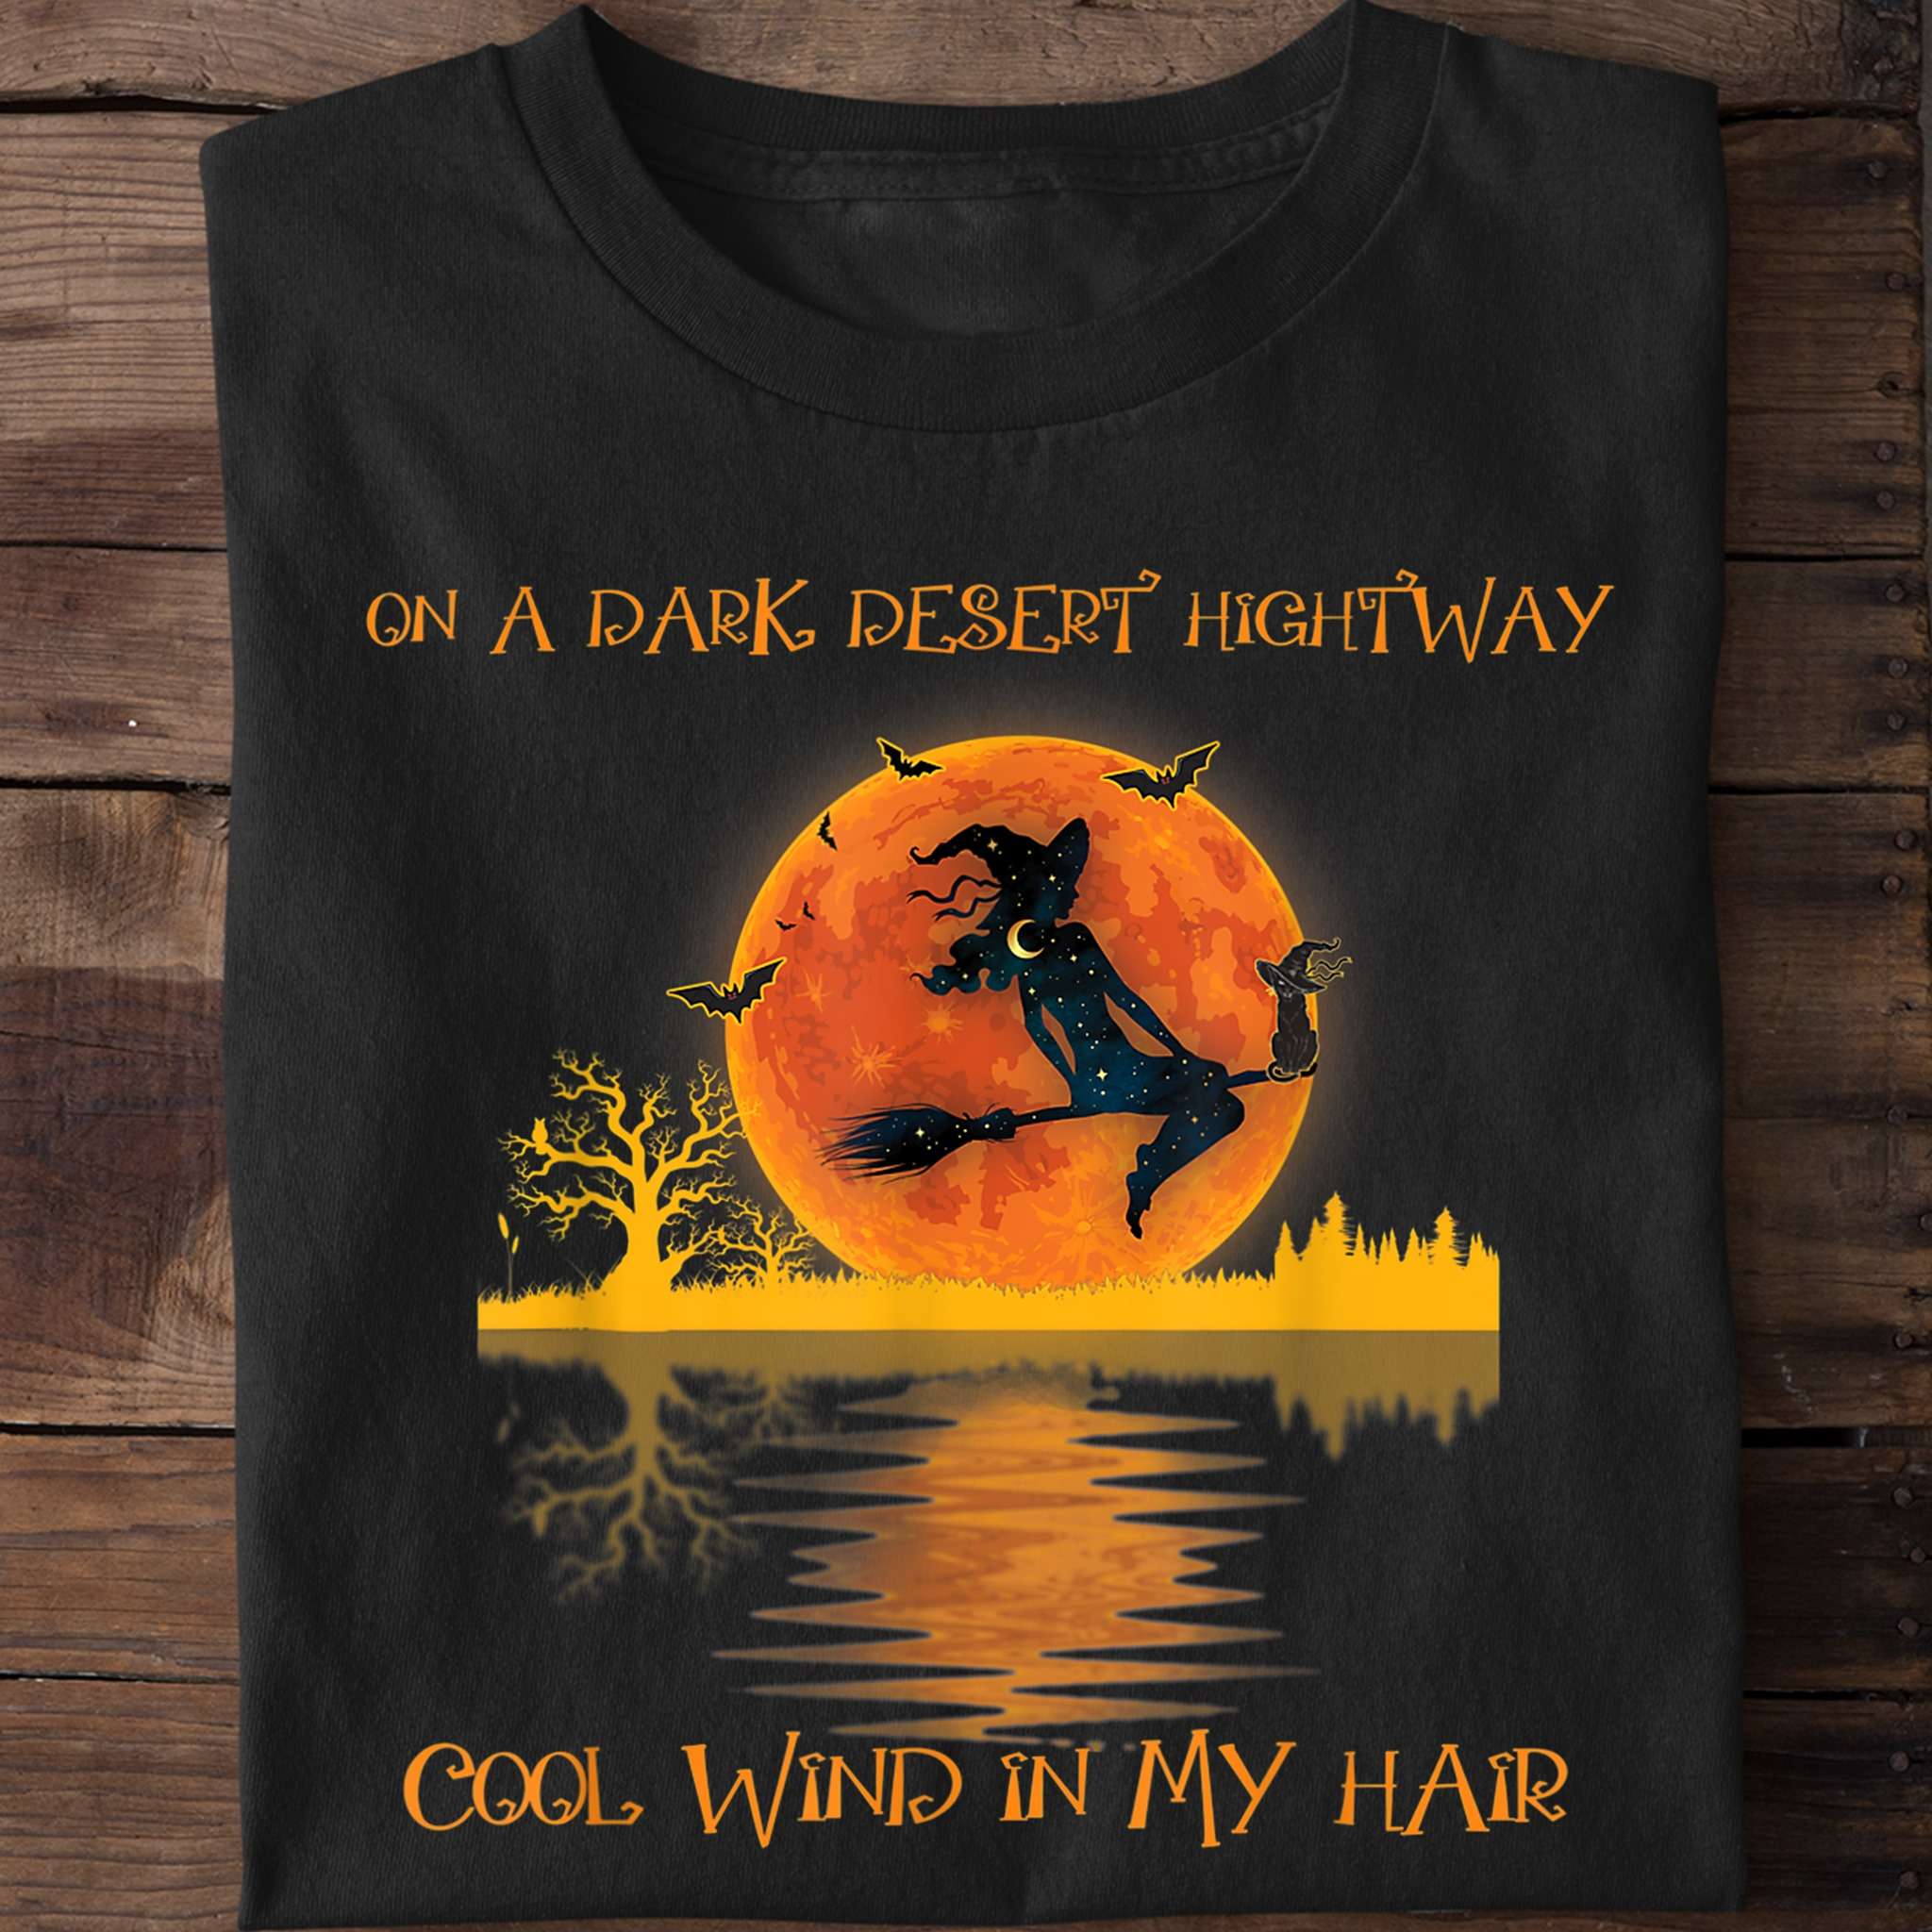 On a dark desert highway, cool wind in my hair - Halloween witch riding broom, witch and cat